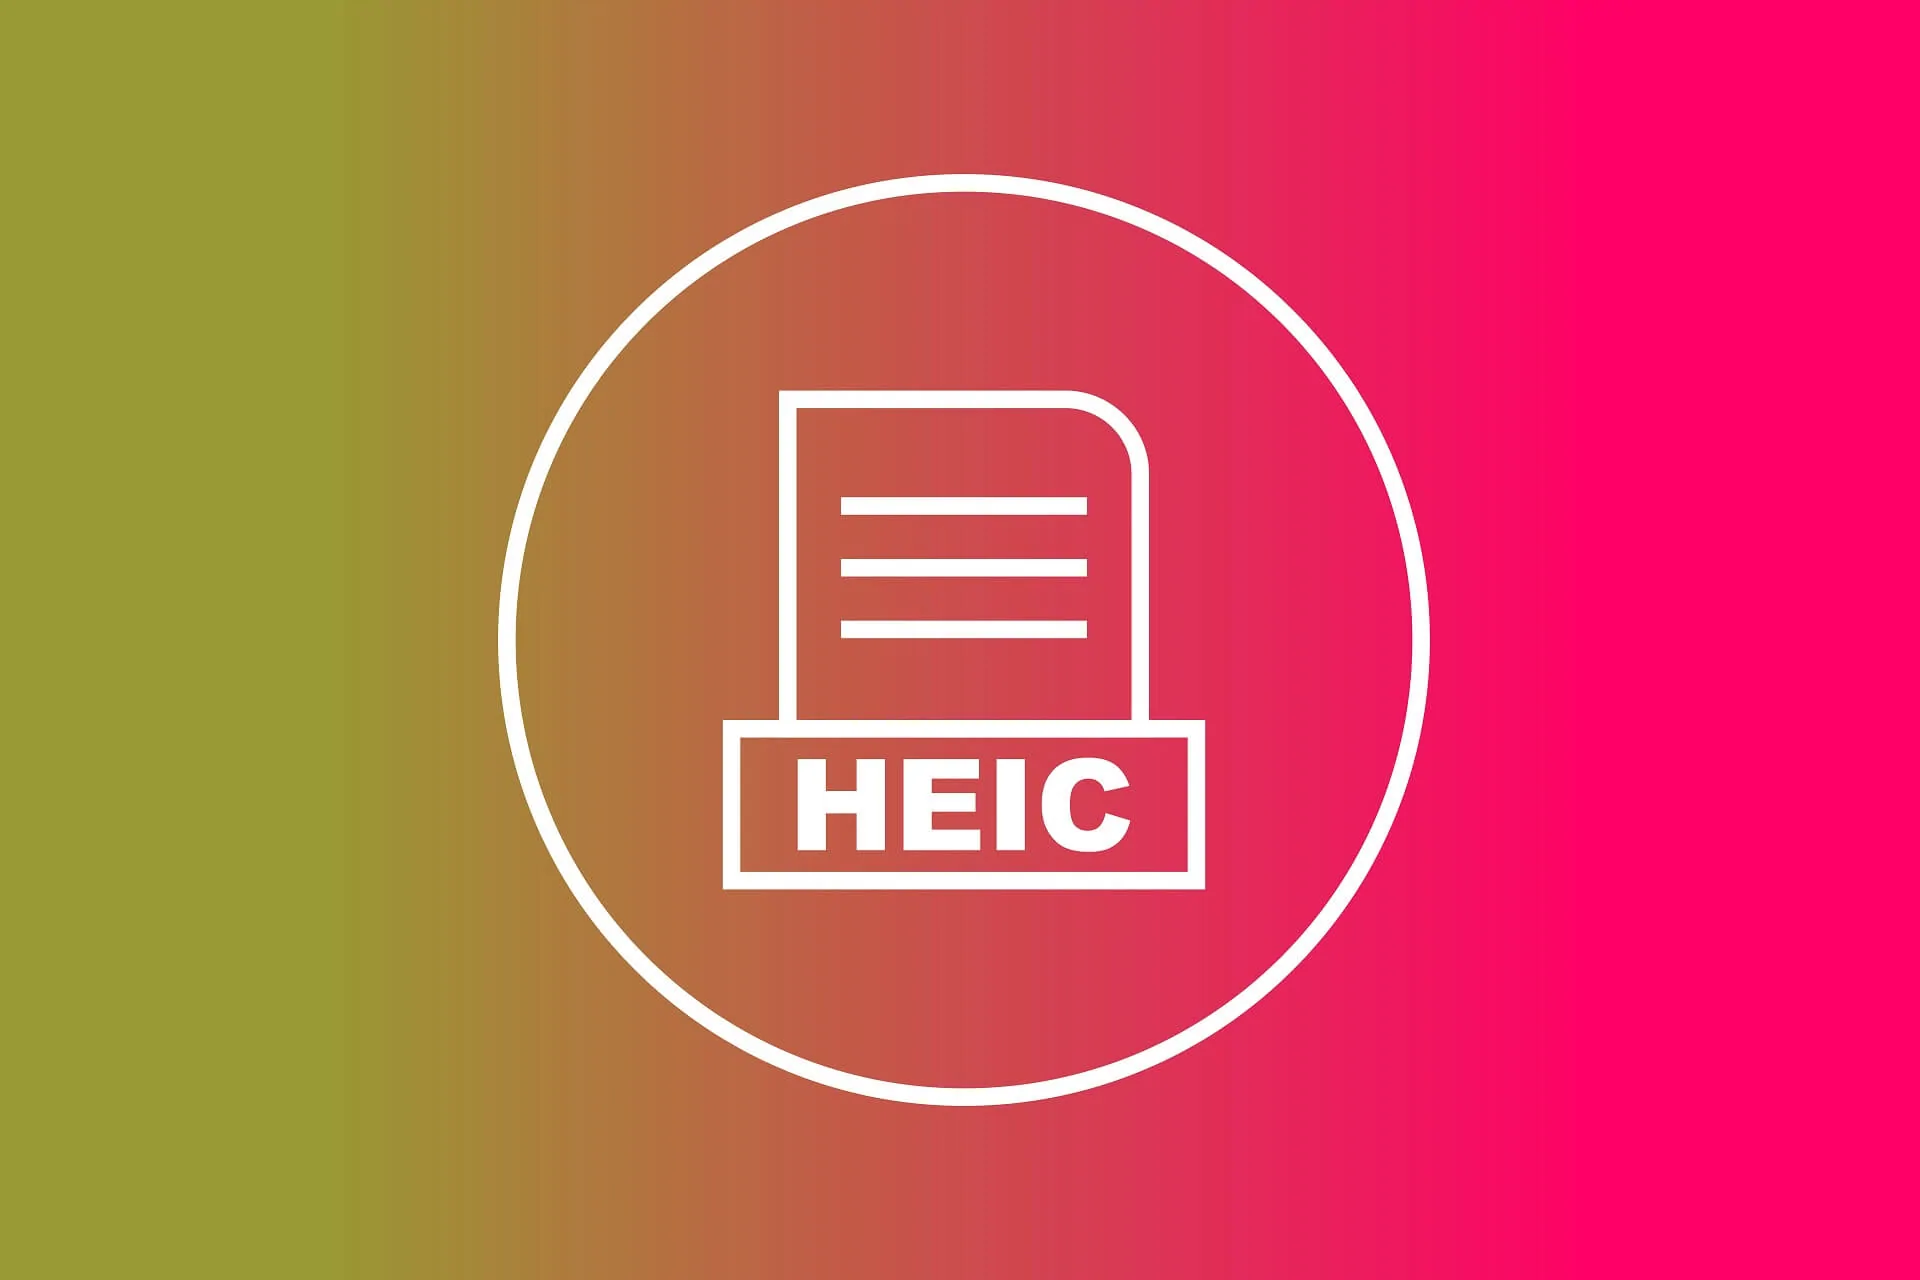 convert heic to jpg images